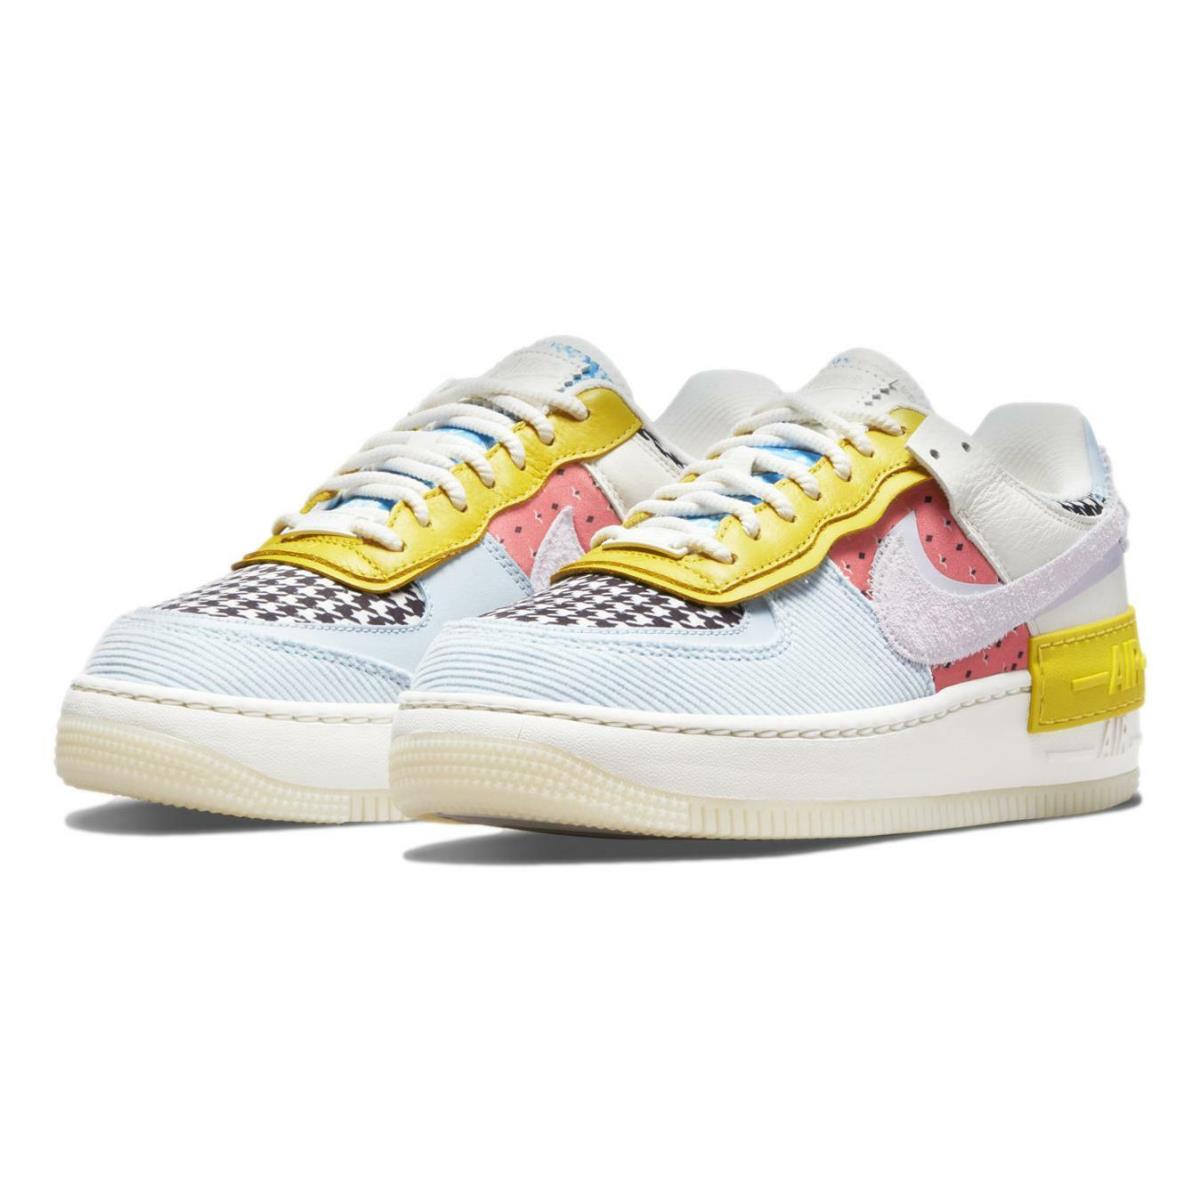 Nike Women`s Air Force 1 Shadow `patchwork` Shoes Sneakers DM8076-100 - Sail/Doll-Hydrogen Blue